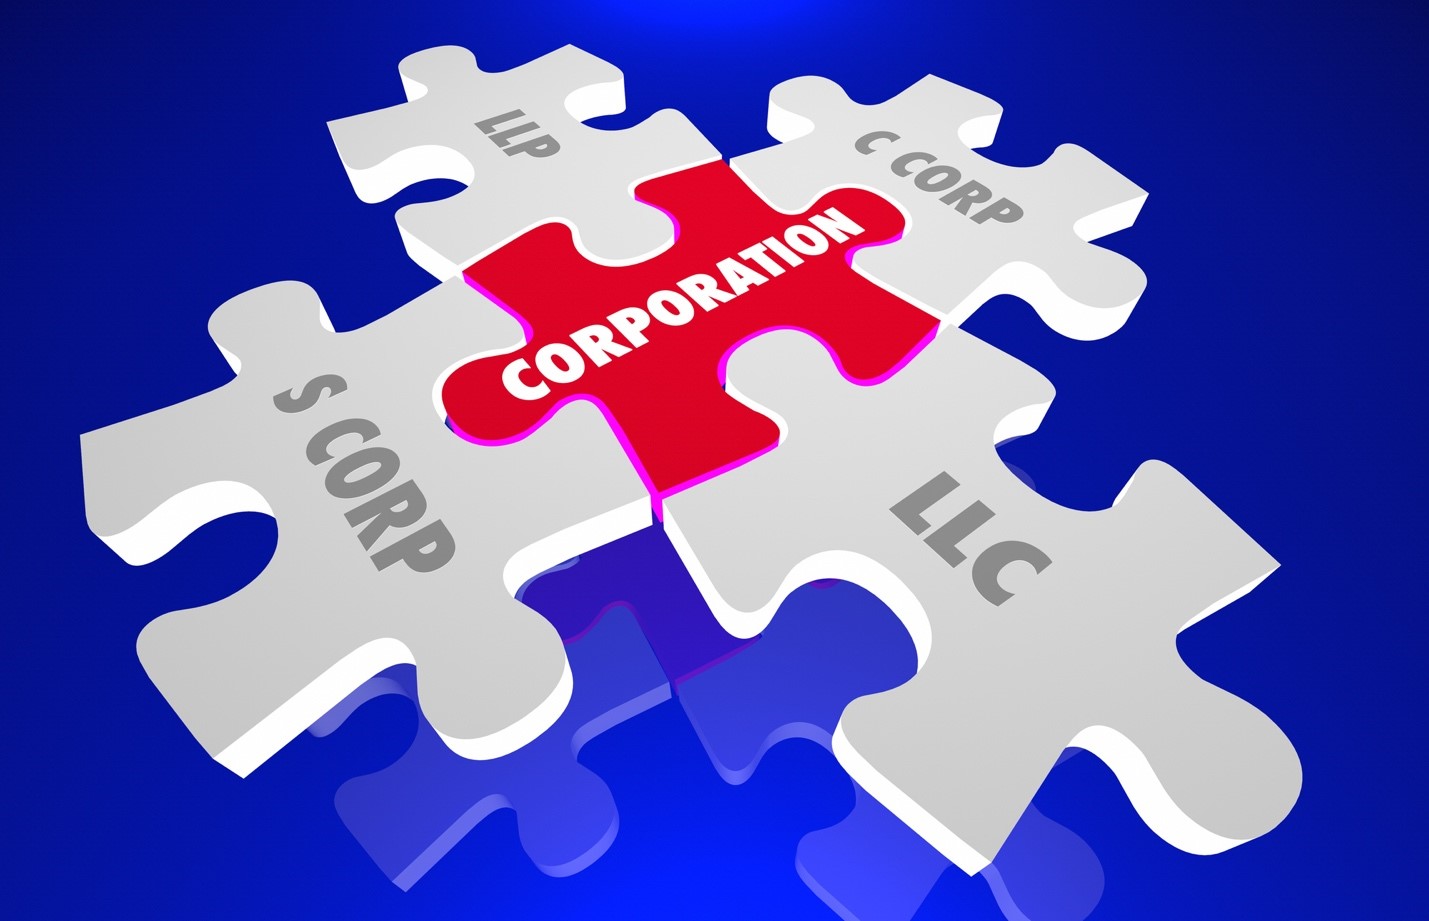 Puzzle pieces of different types of business entities